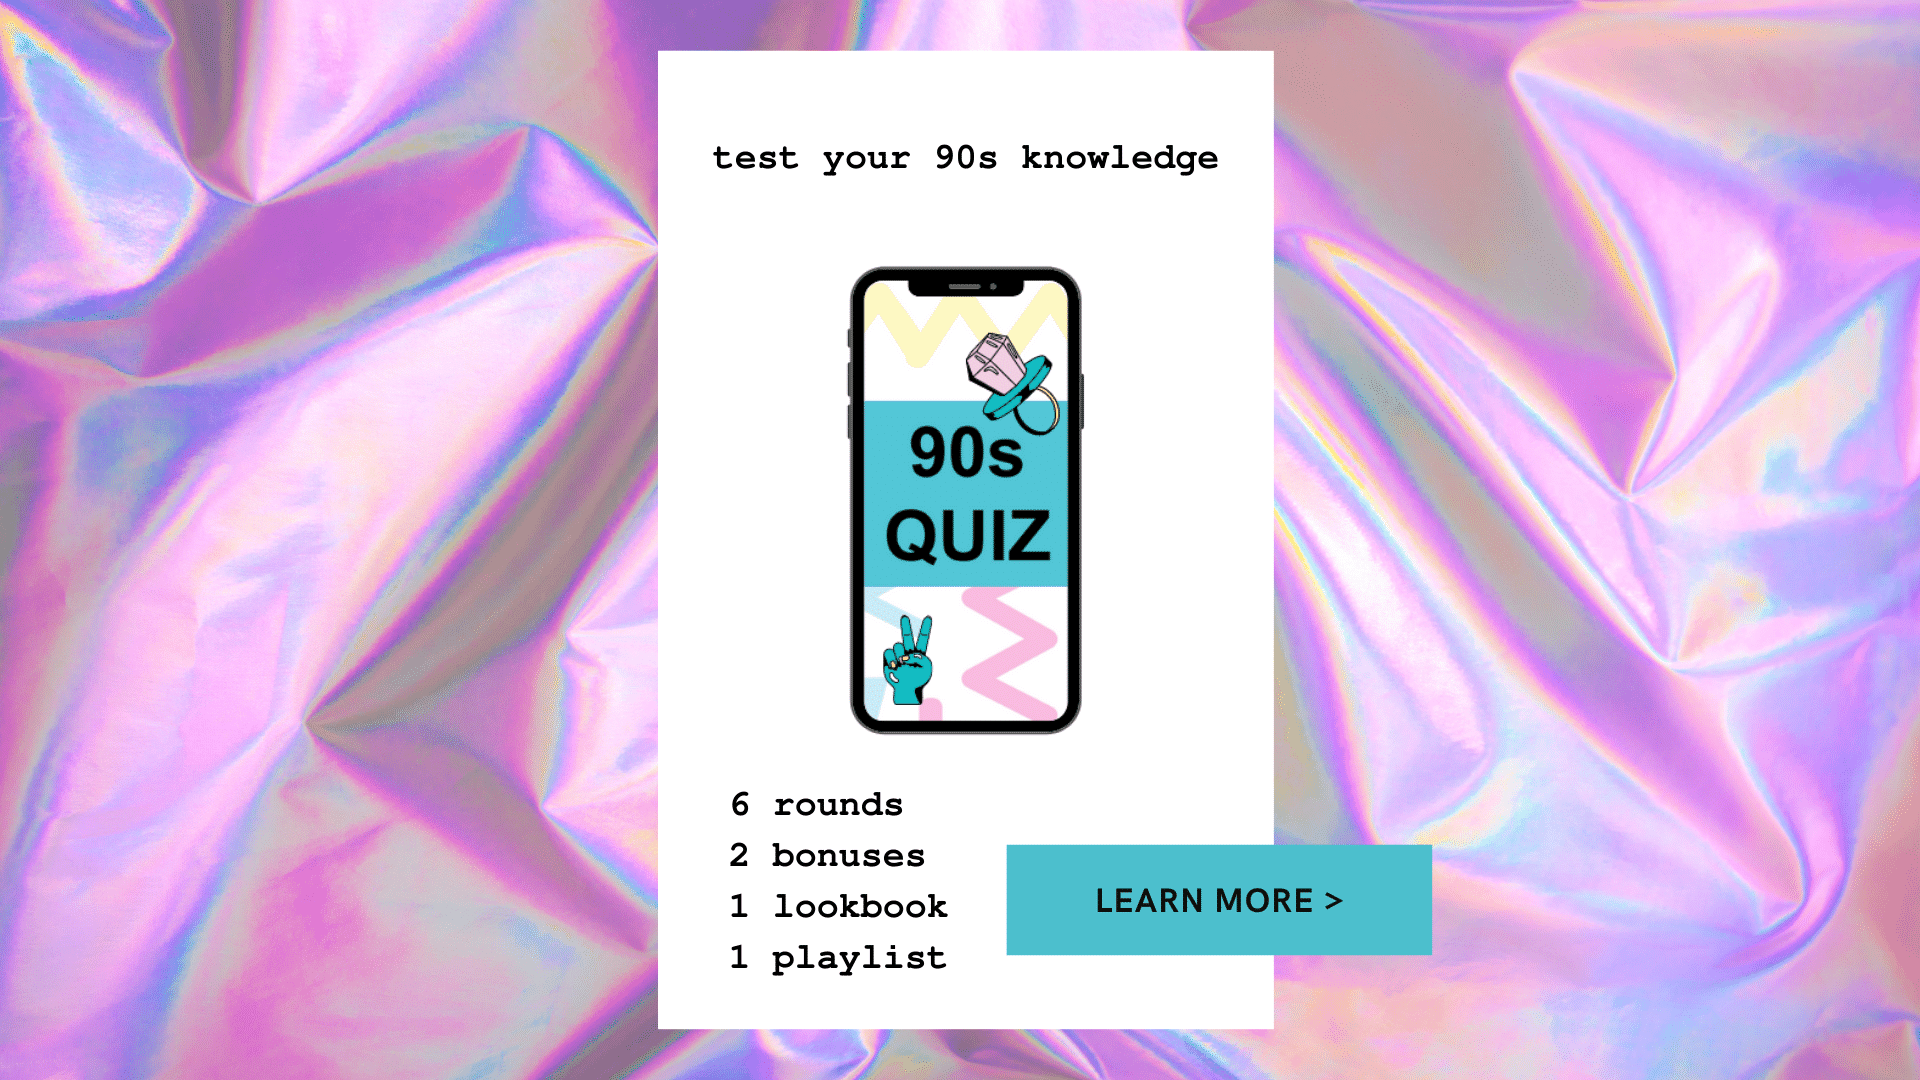 90s Quiz Callout Cellphone with 90s Quiz text against pastel coloured background